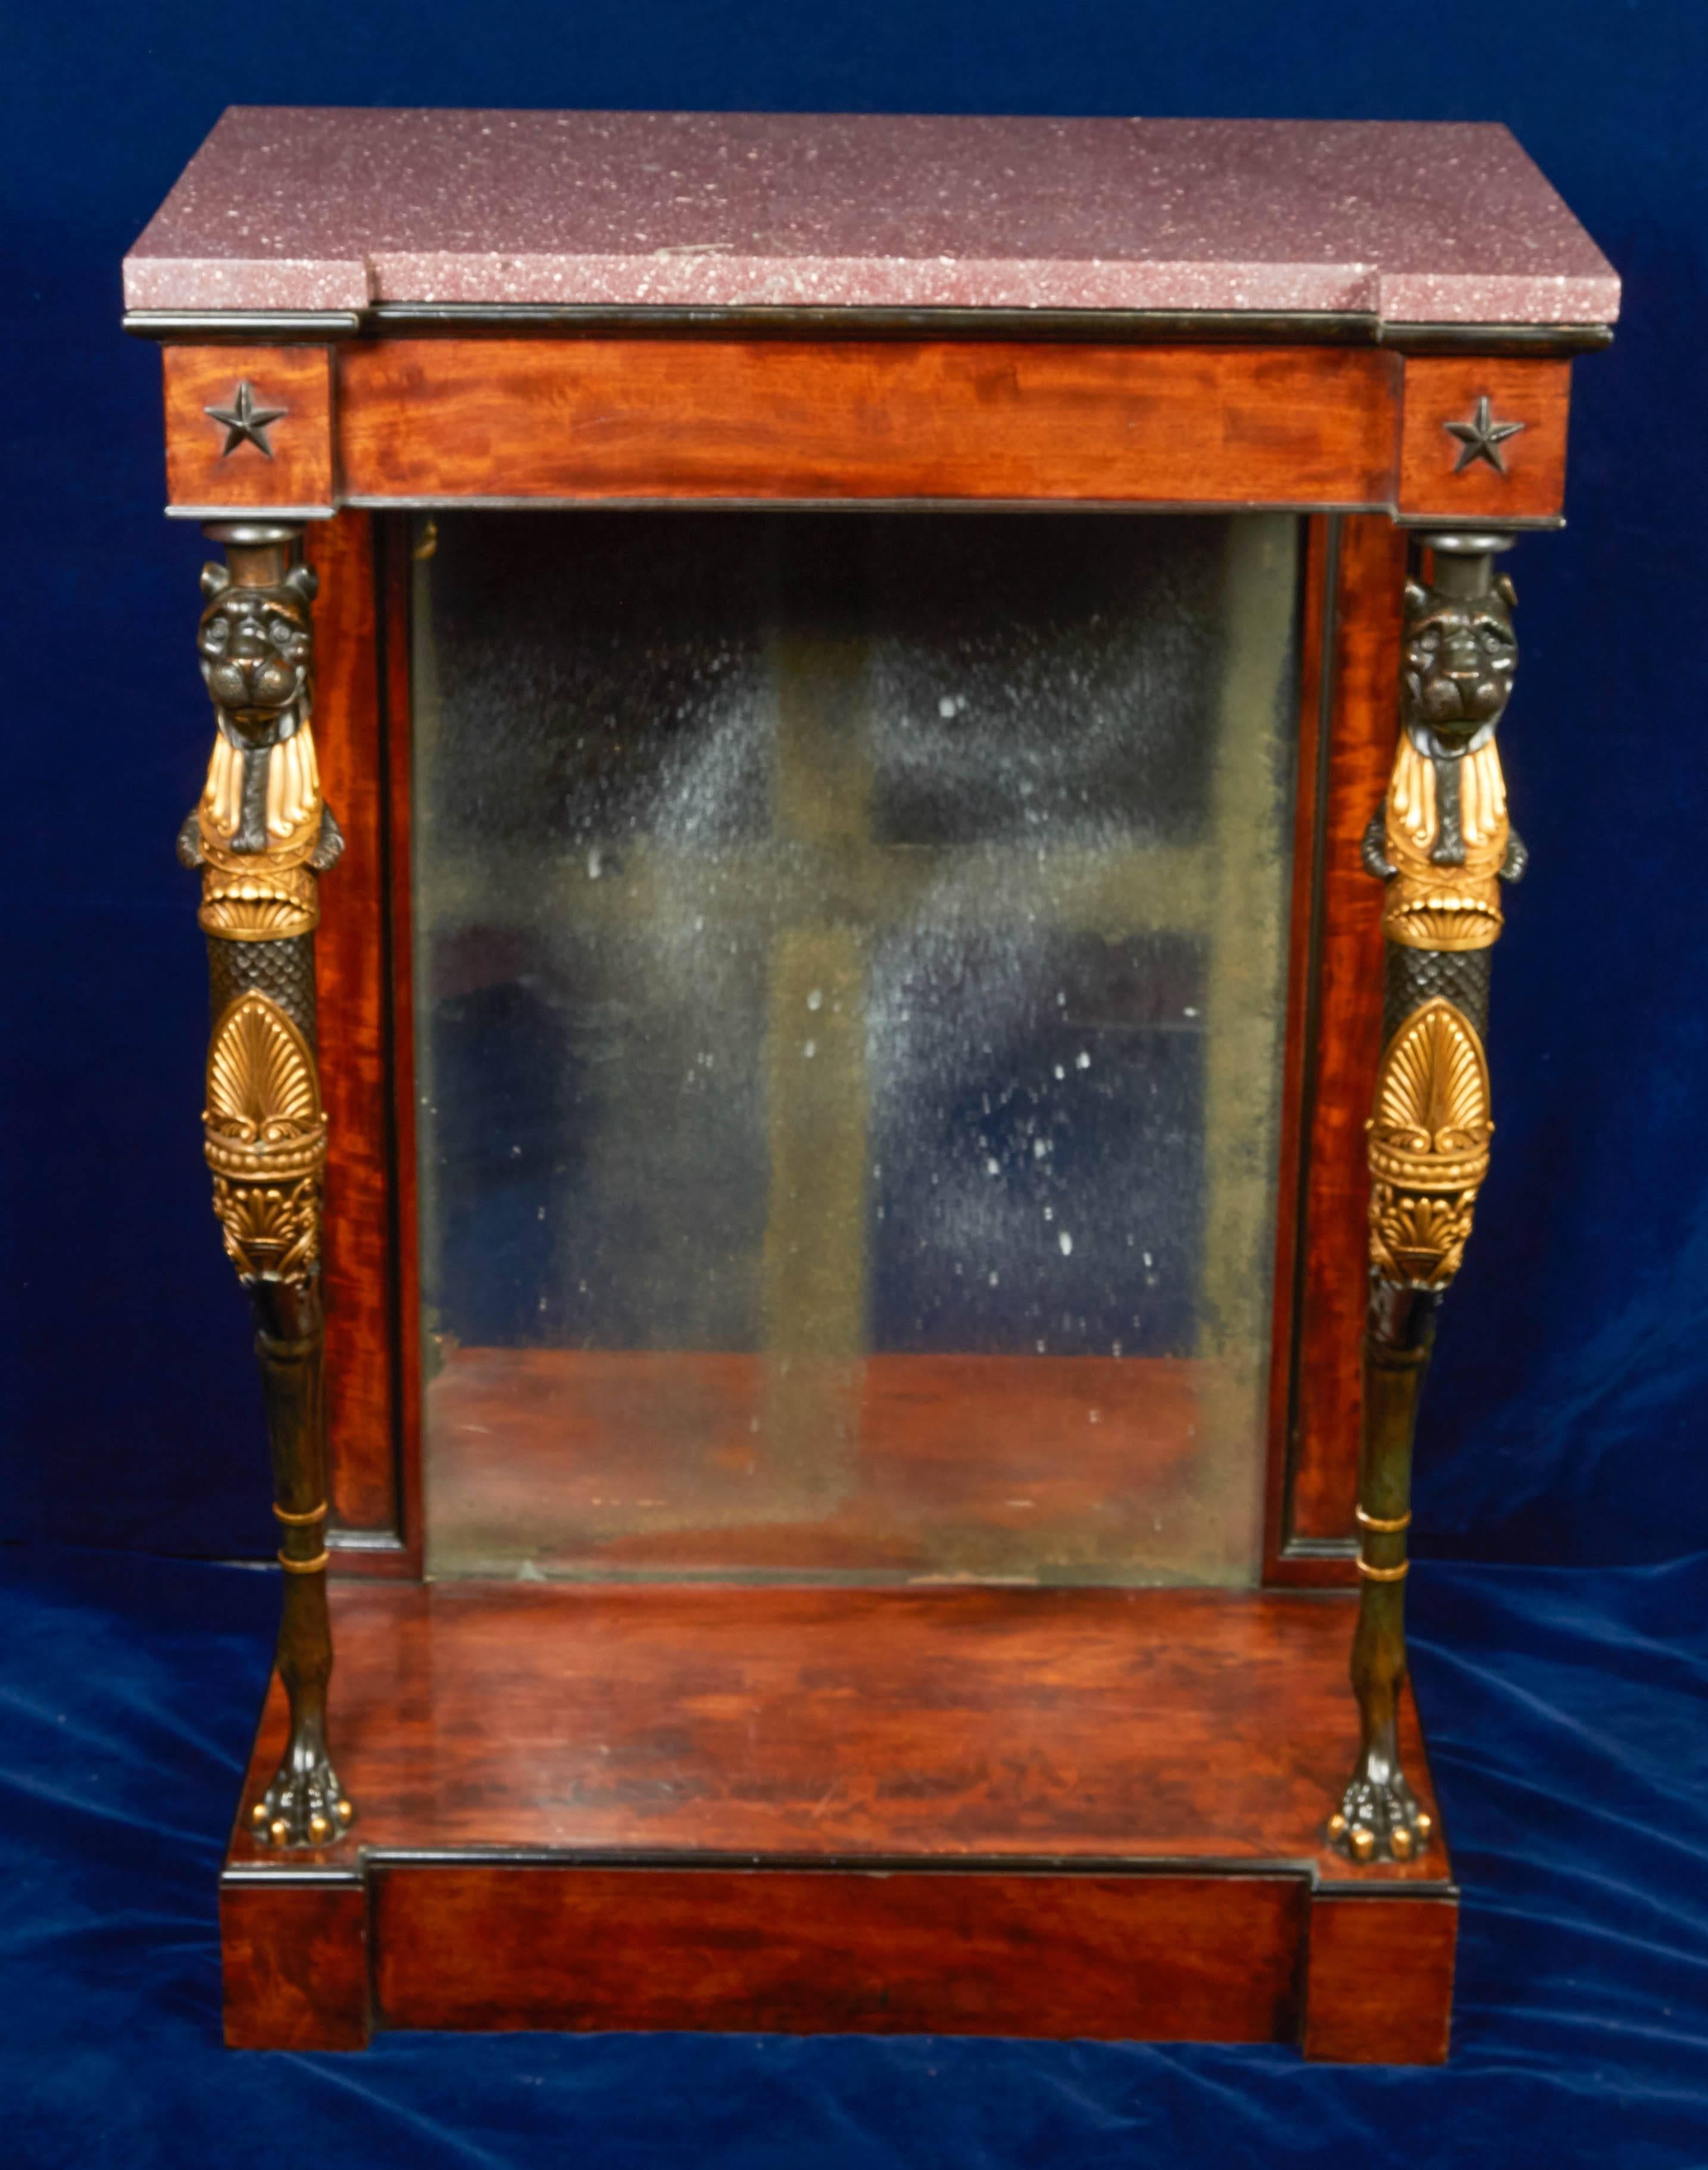 A very fine and rare pair of Regency part-ebonized mahogany gilt and patinated Bronze Console Tables in the manner of George Smith, early 1800s, circa 1810. Each side table with a Egyptian Porphory top; Each top above a conforming frieze with